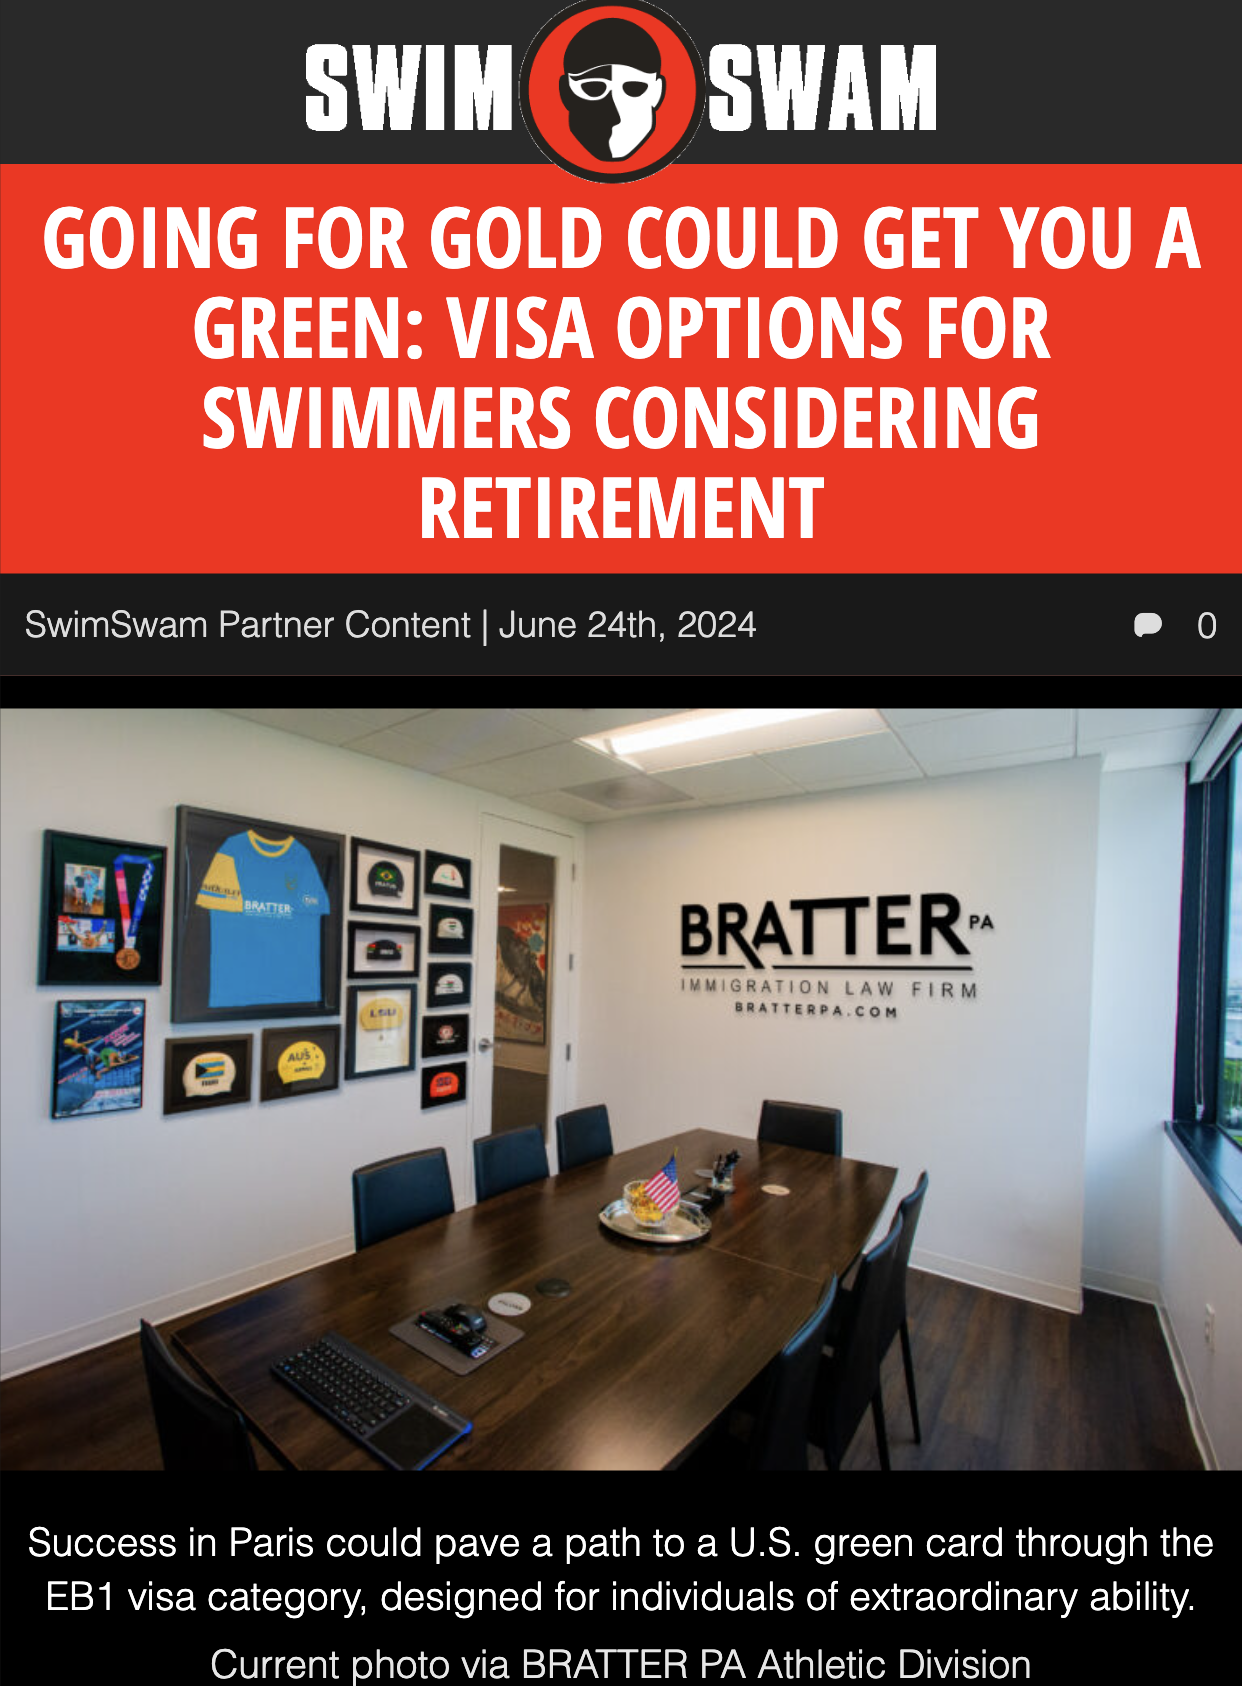 Going For Gold Could Get You A Green: Visa Options for Swimmers Considering Retirement